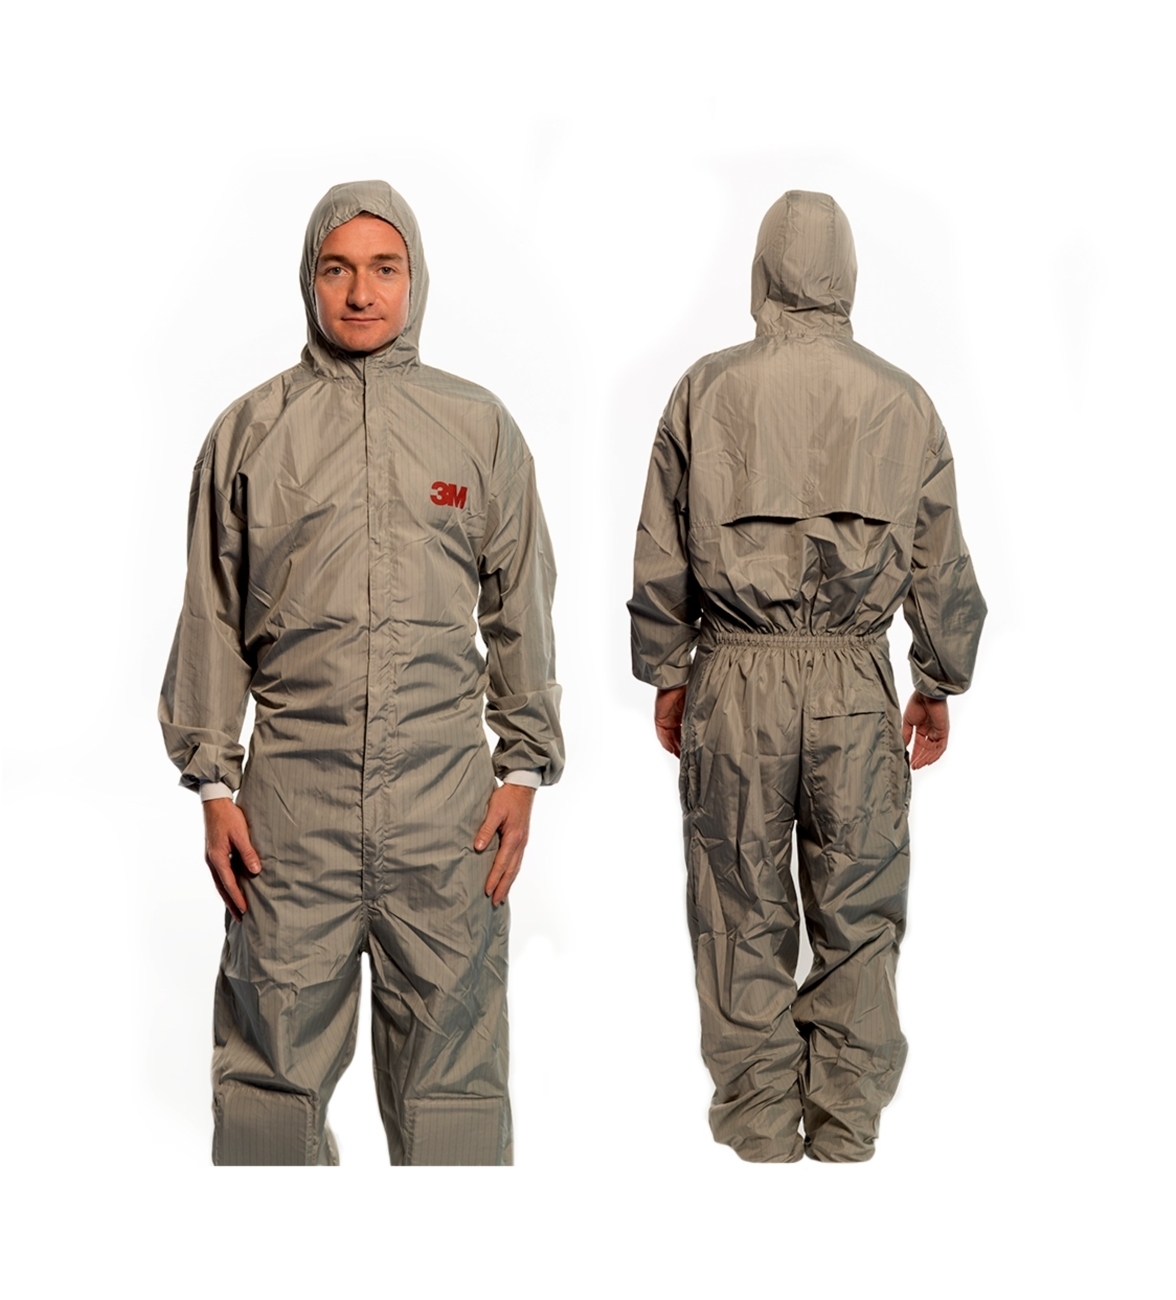 3M 51851 Protective suit, gray, type 6, size 2XL, material polyester material with carbon fiber threads running vertically over the fabric, reusable protective suit